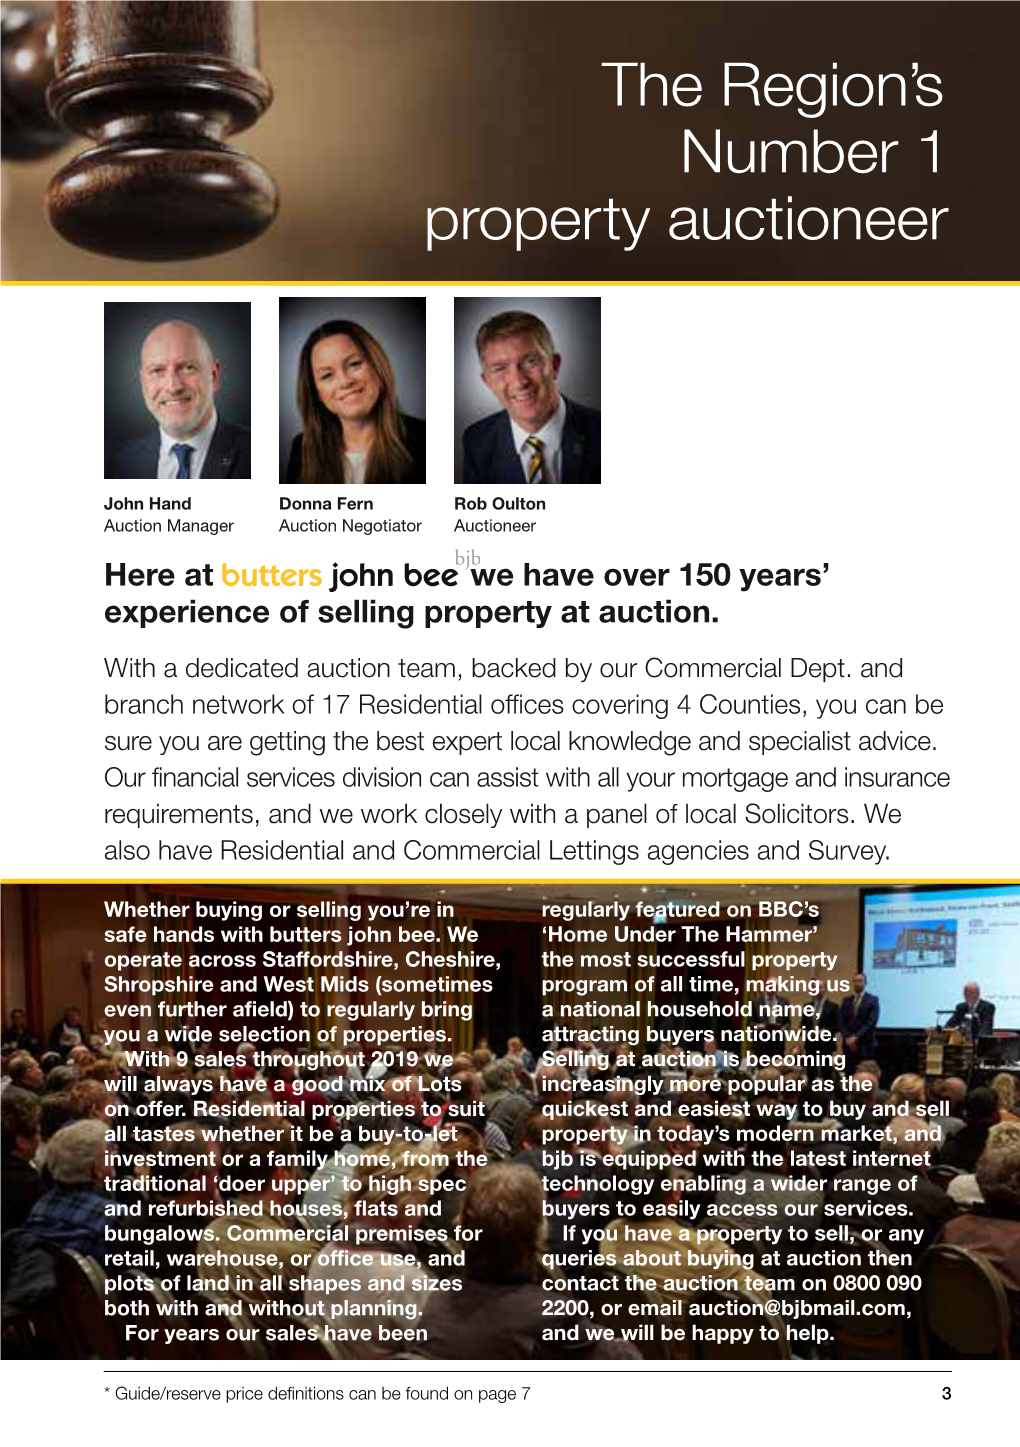 The Region's Number 1 Property Auctioneer